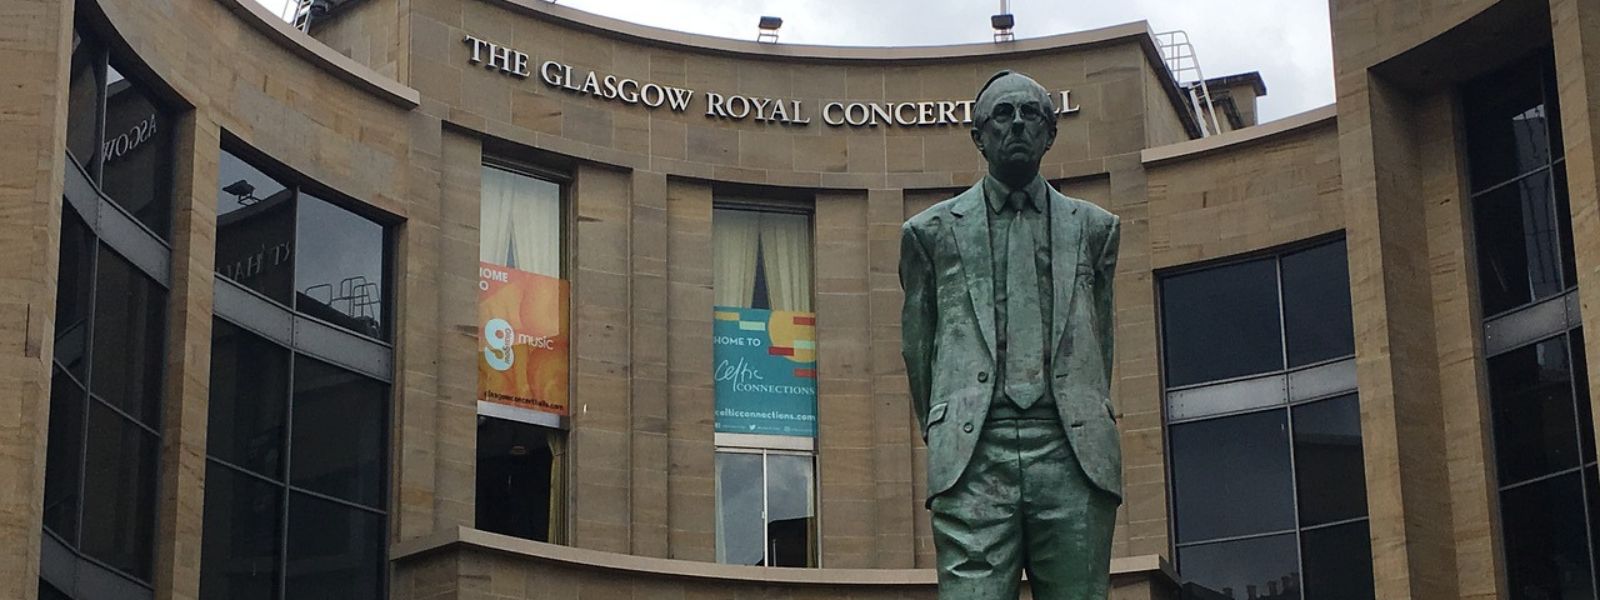 A statue of Scottish politician Donald Dewar standing in front of the entrance to Glasgow Royal Concert Hall